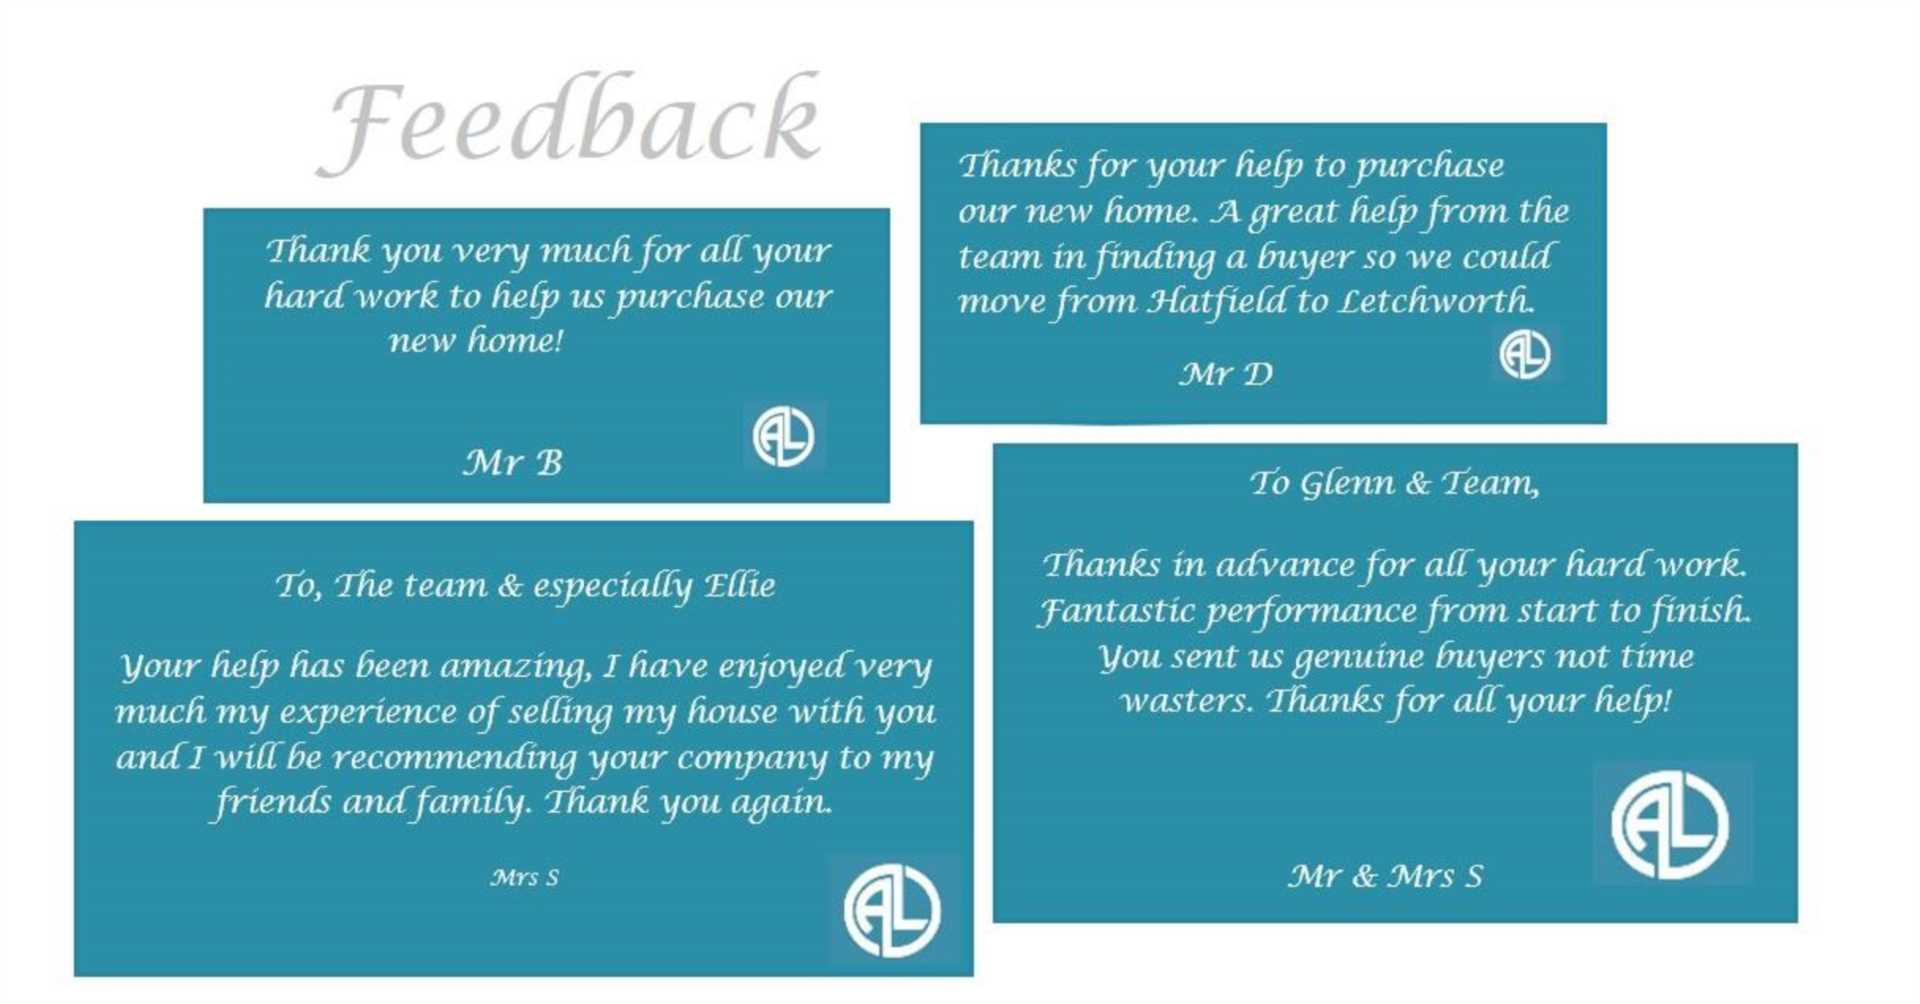 More outstanding feedback from our clients!!